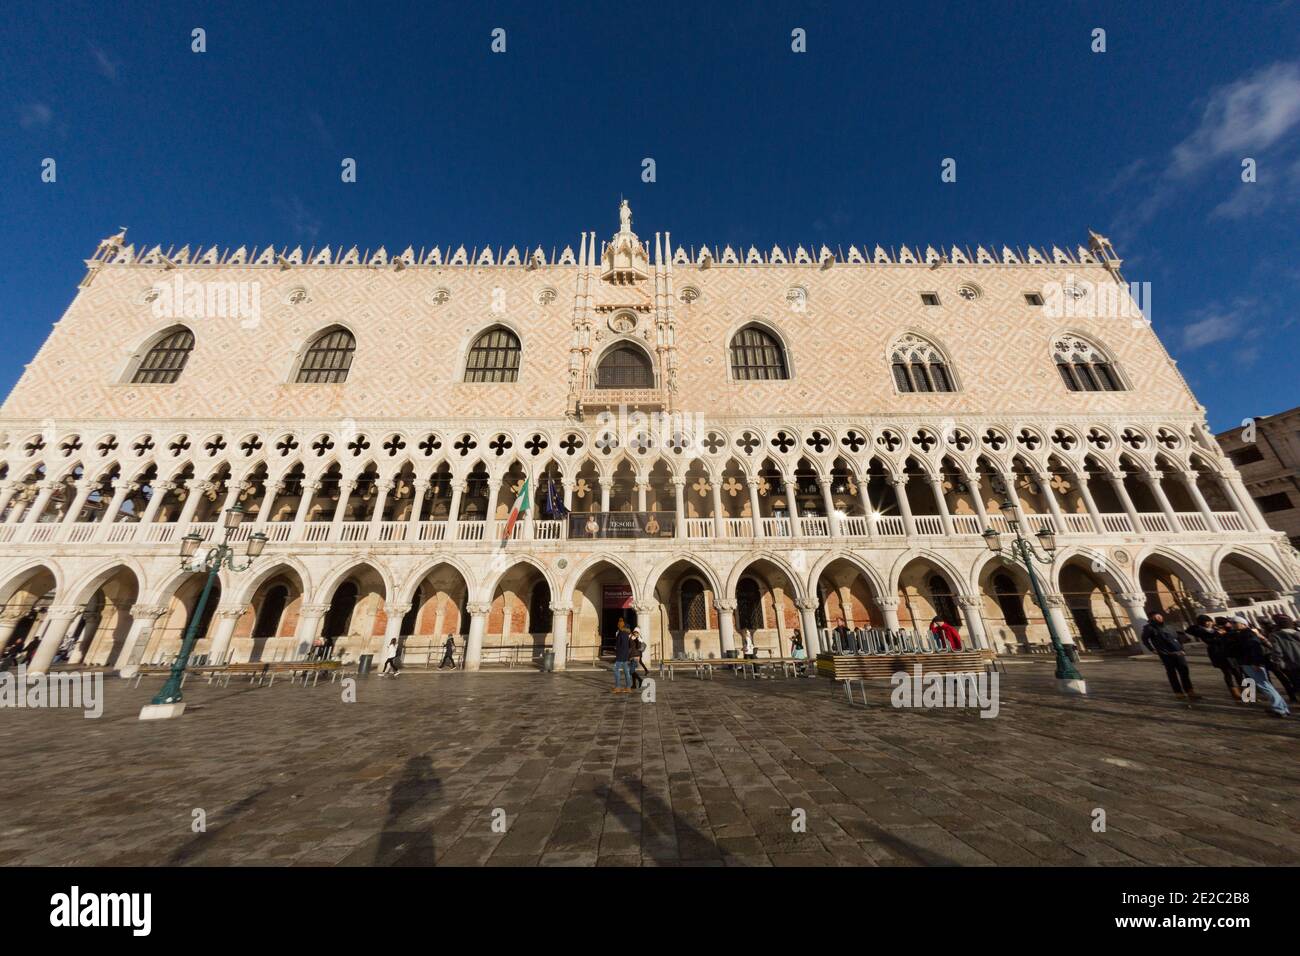 Innenraum des Dogenpalastes (Palazzo Ducale), Panorama des höheren Rathauses, Venedig.`s Stockfoto